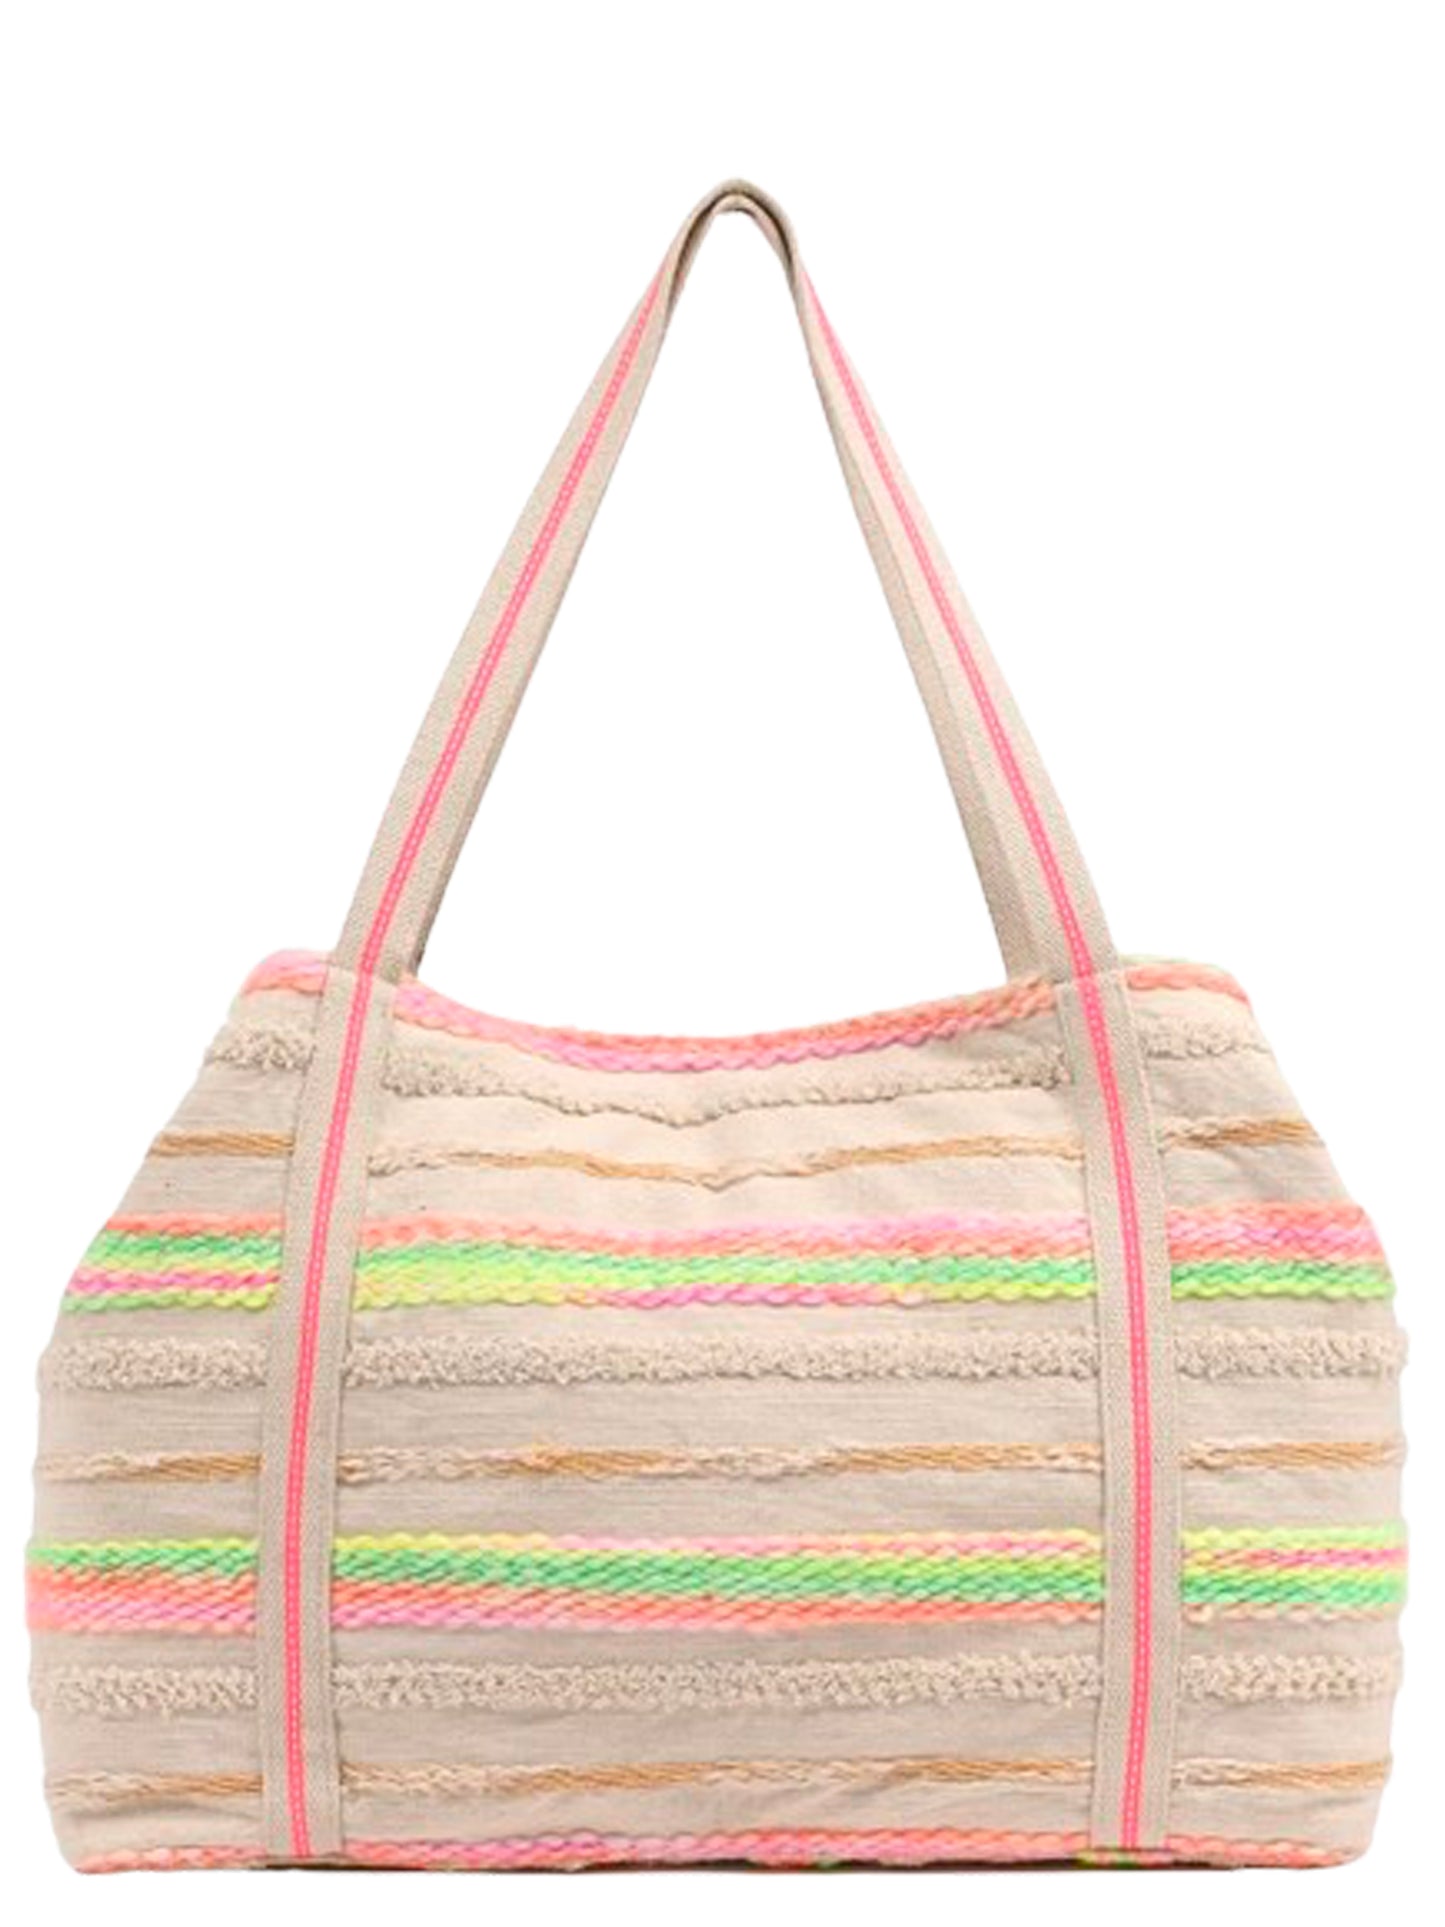 neon aztec embellished tote